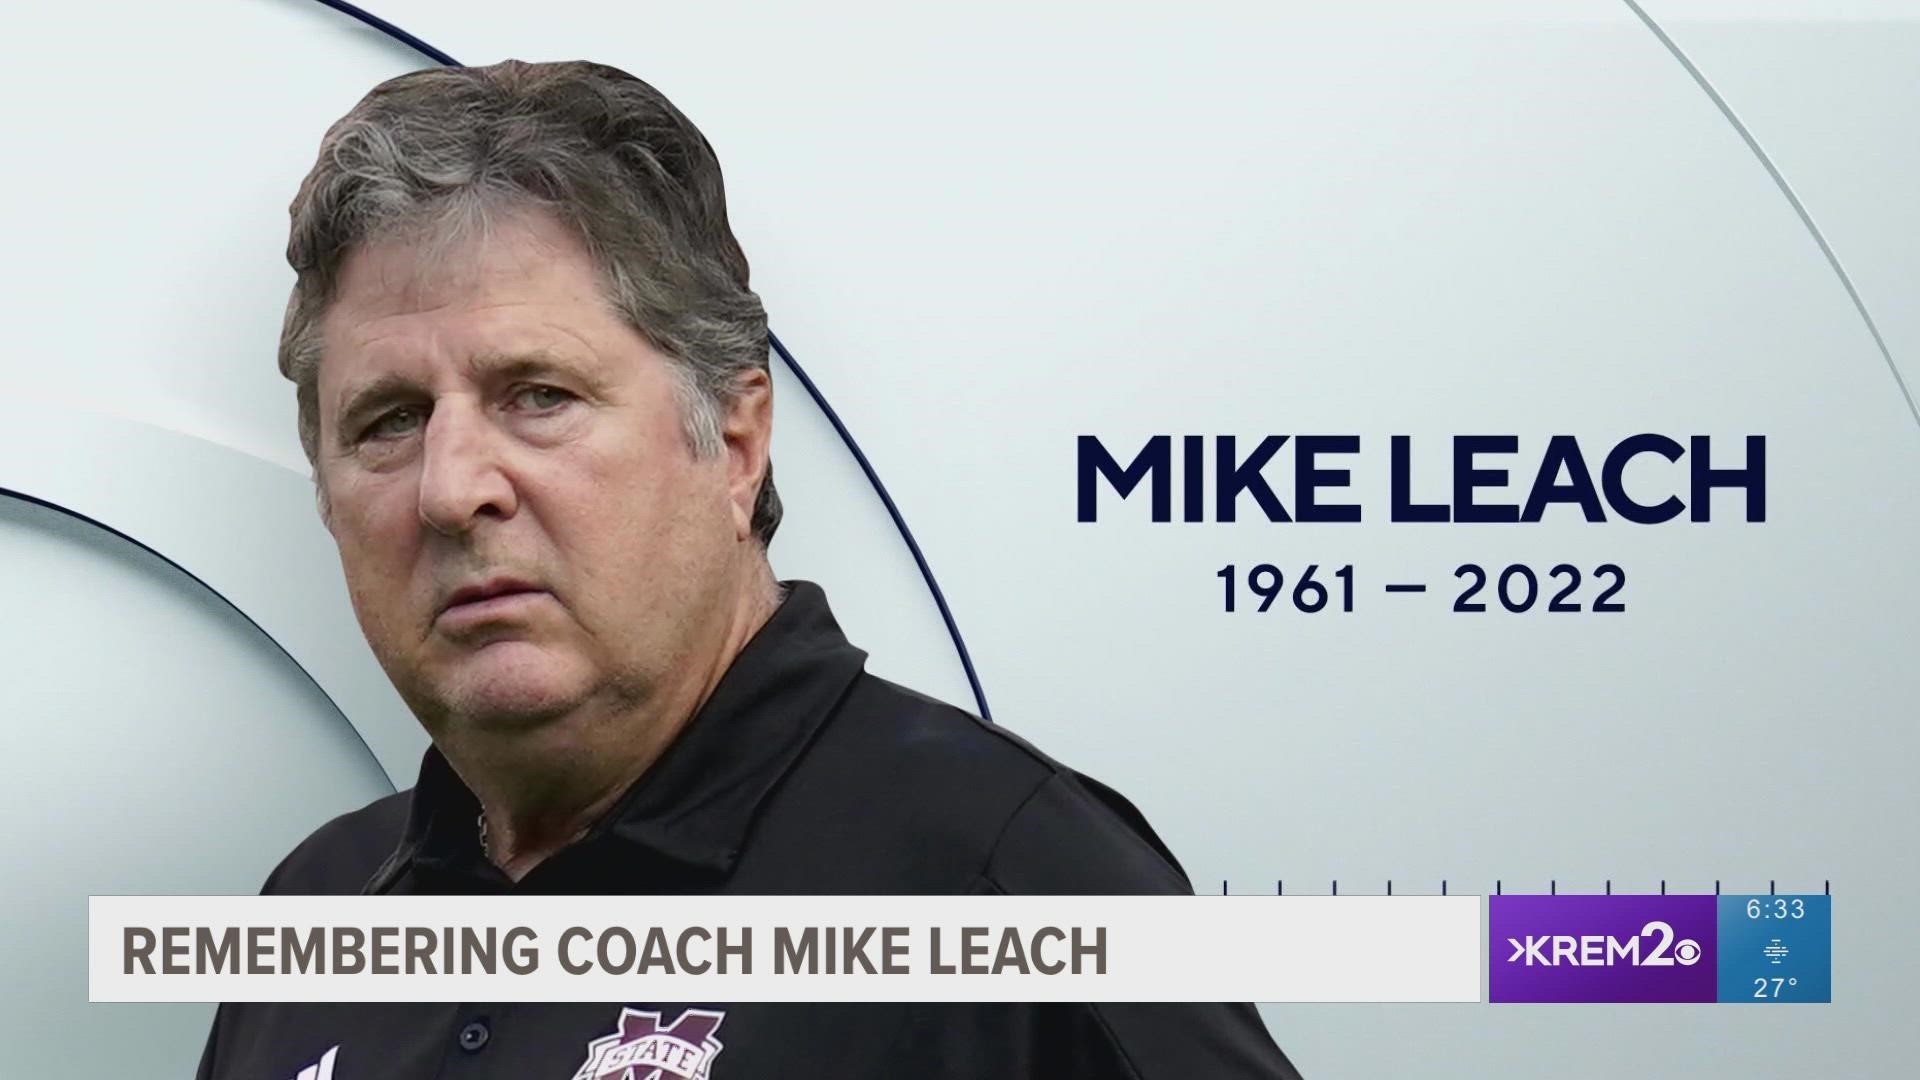 KREM 2's Travis Green details the storied legacy and many accomplishments of former WSU head football coach Mike Leach as the community mourns his recent passing.